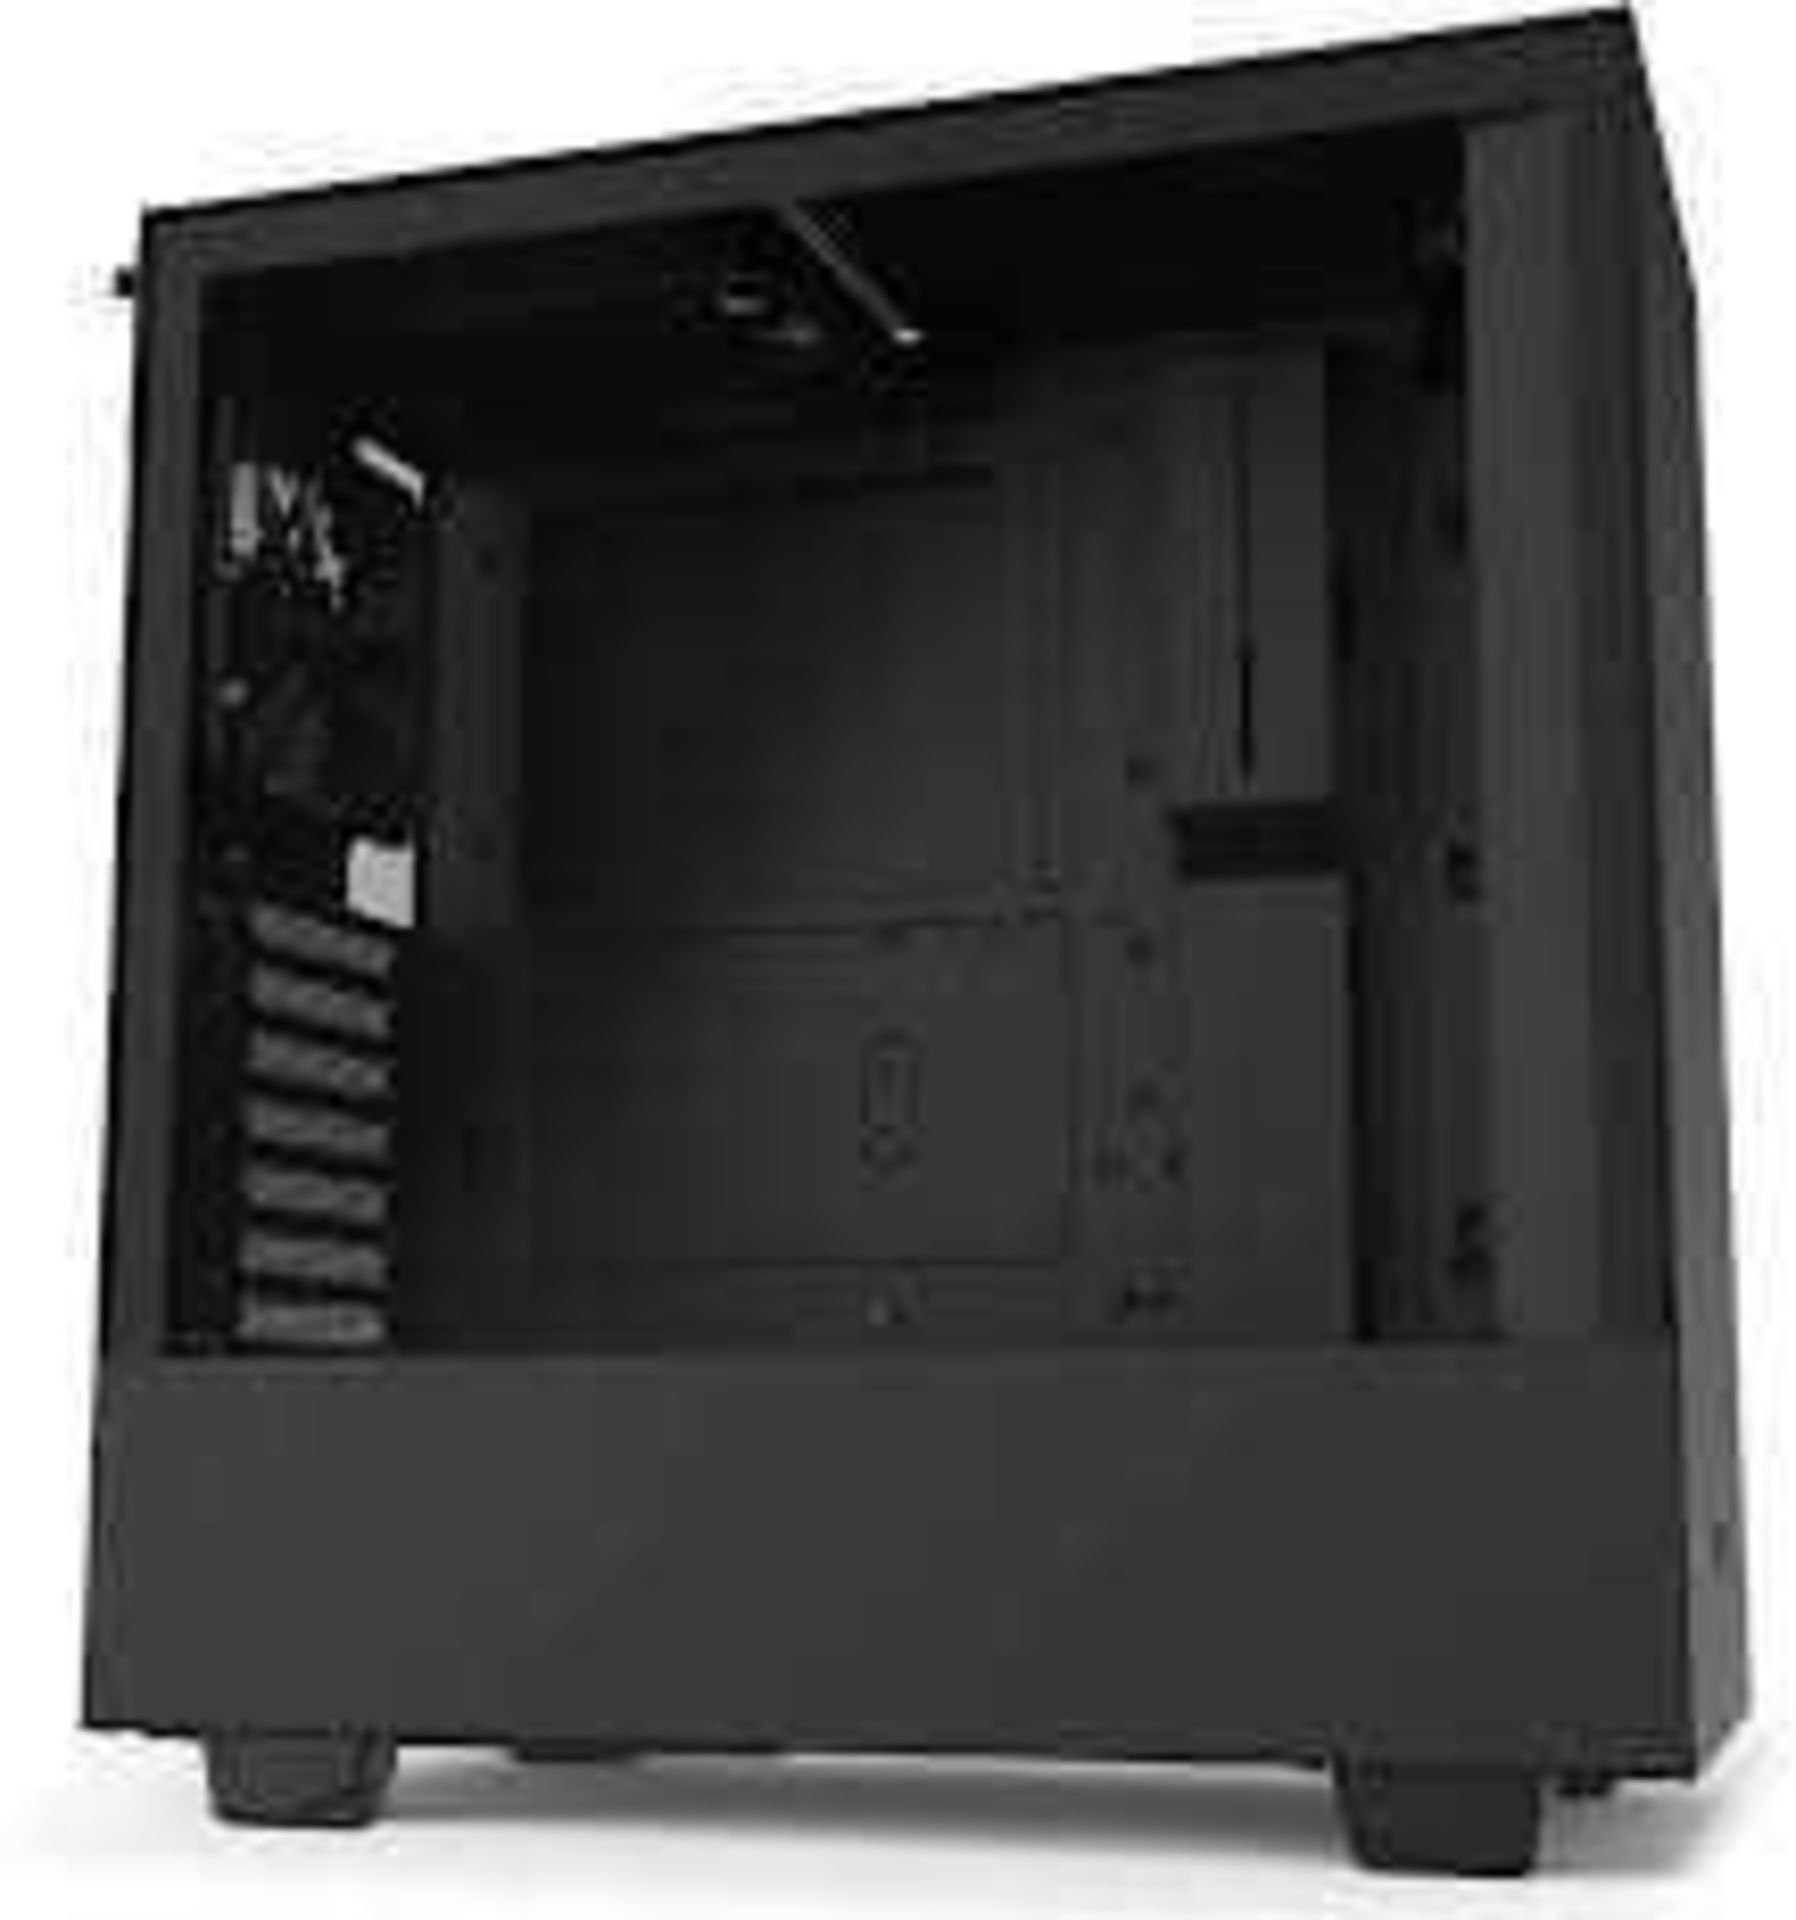 RRP £80 Boxed Nzxth510 Mid Tower Atx Gaming Case (Appraisals Available On Request) (Pictures For